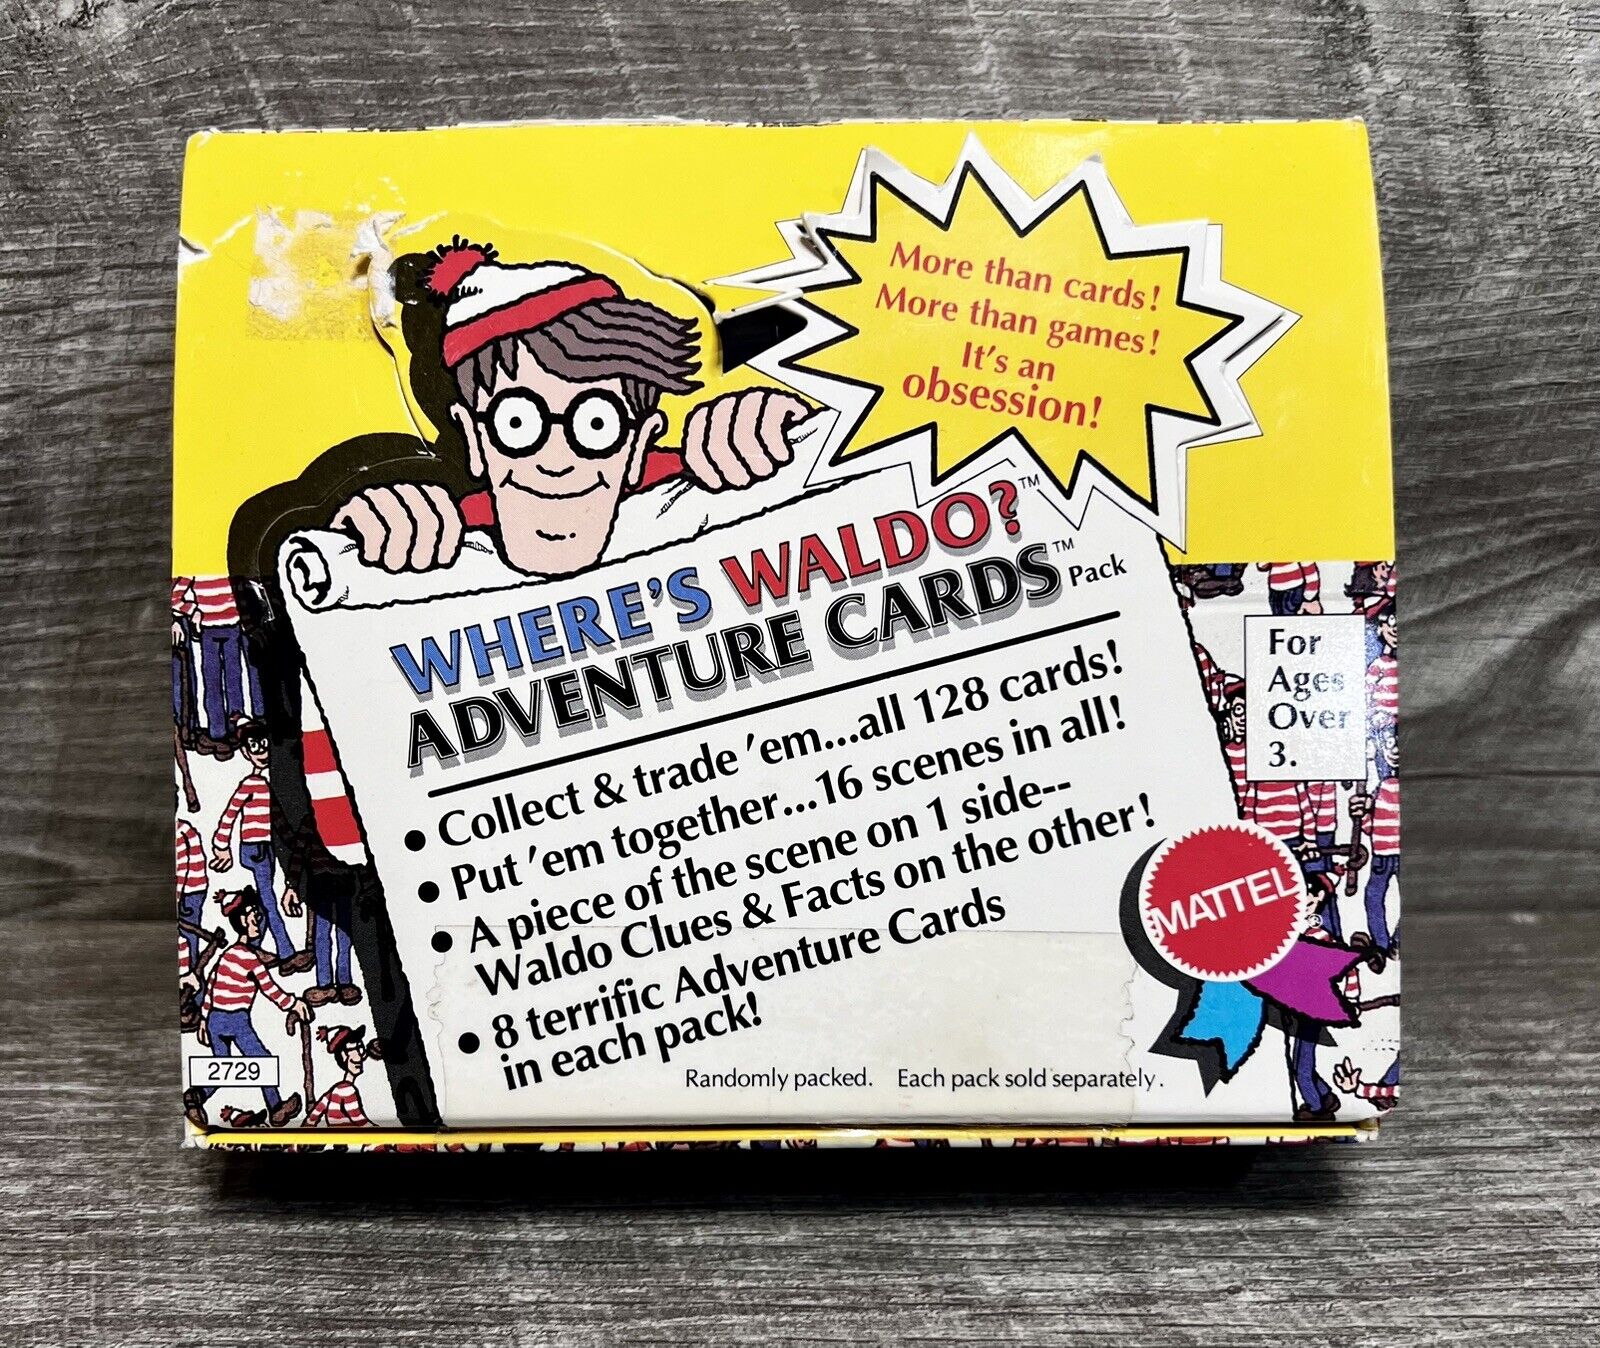 1991 Mattel Wheres Waldo Adventure Cards 24 Factory Sealed Packs in Opened Box